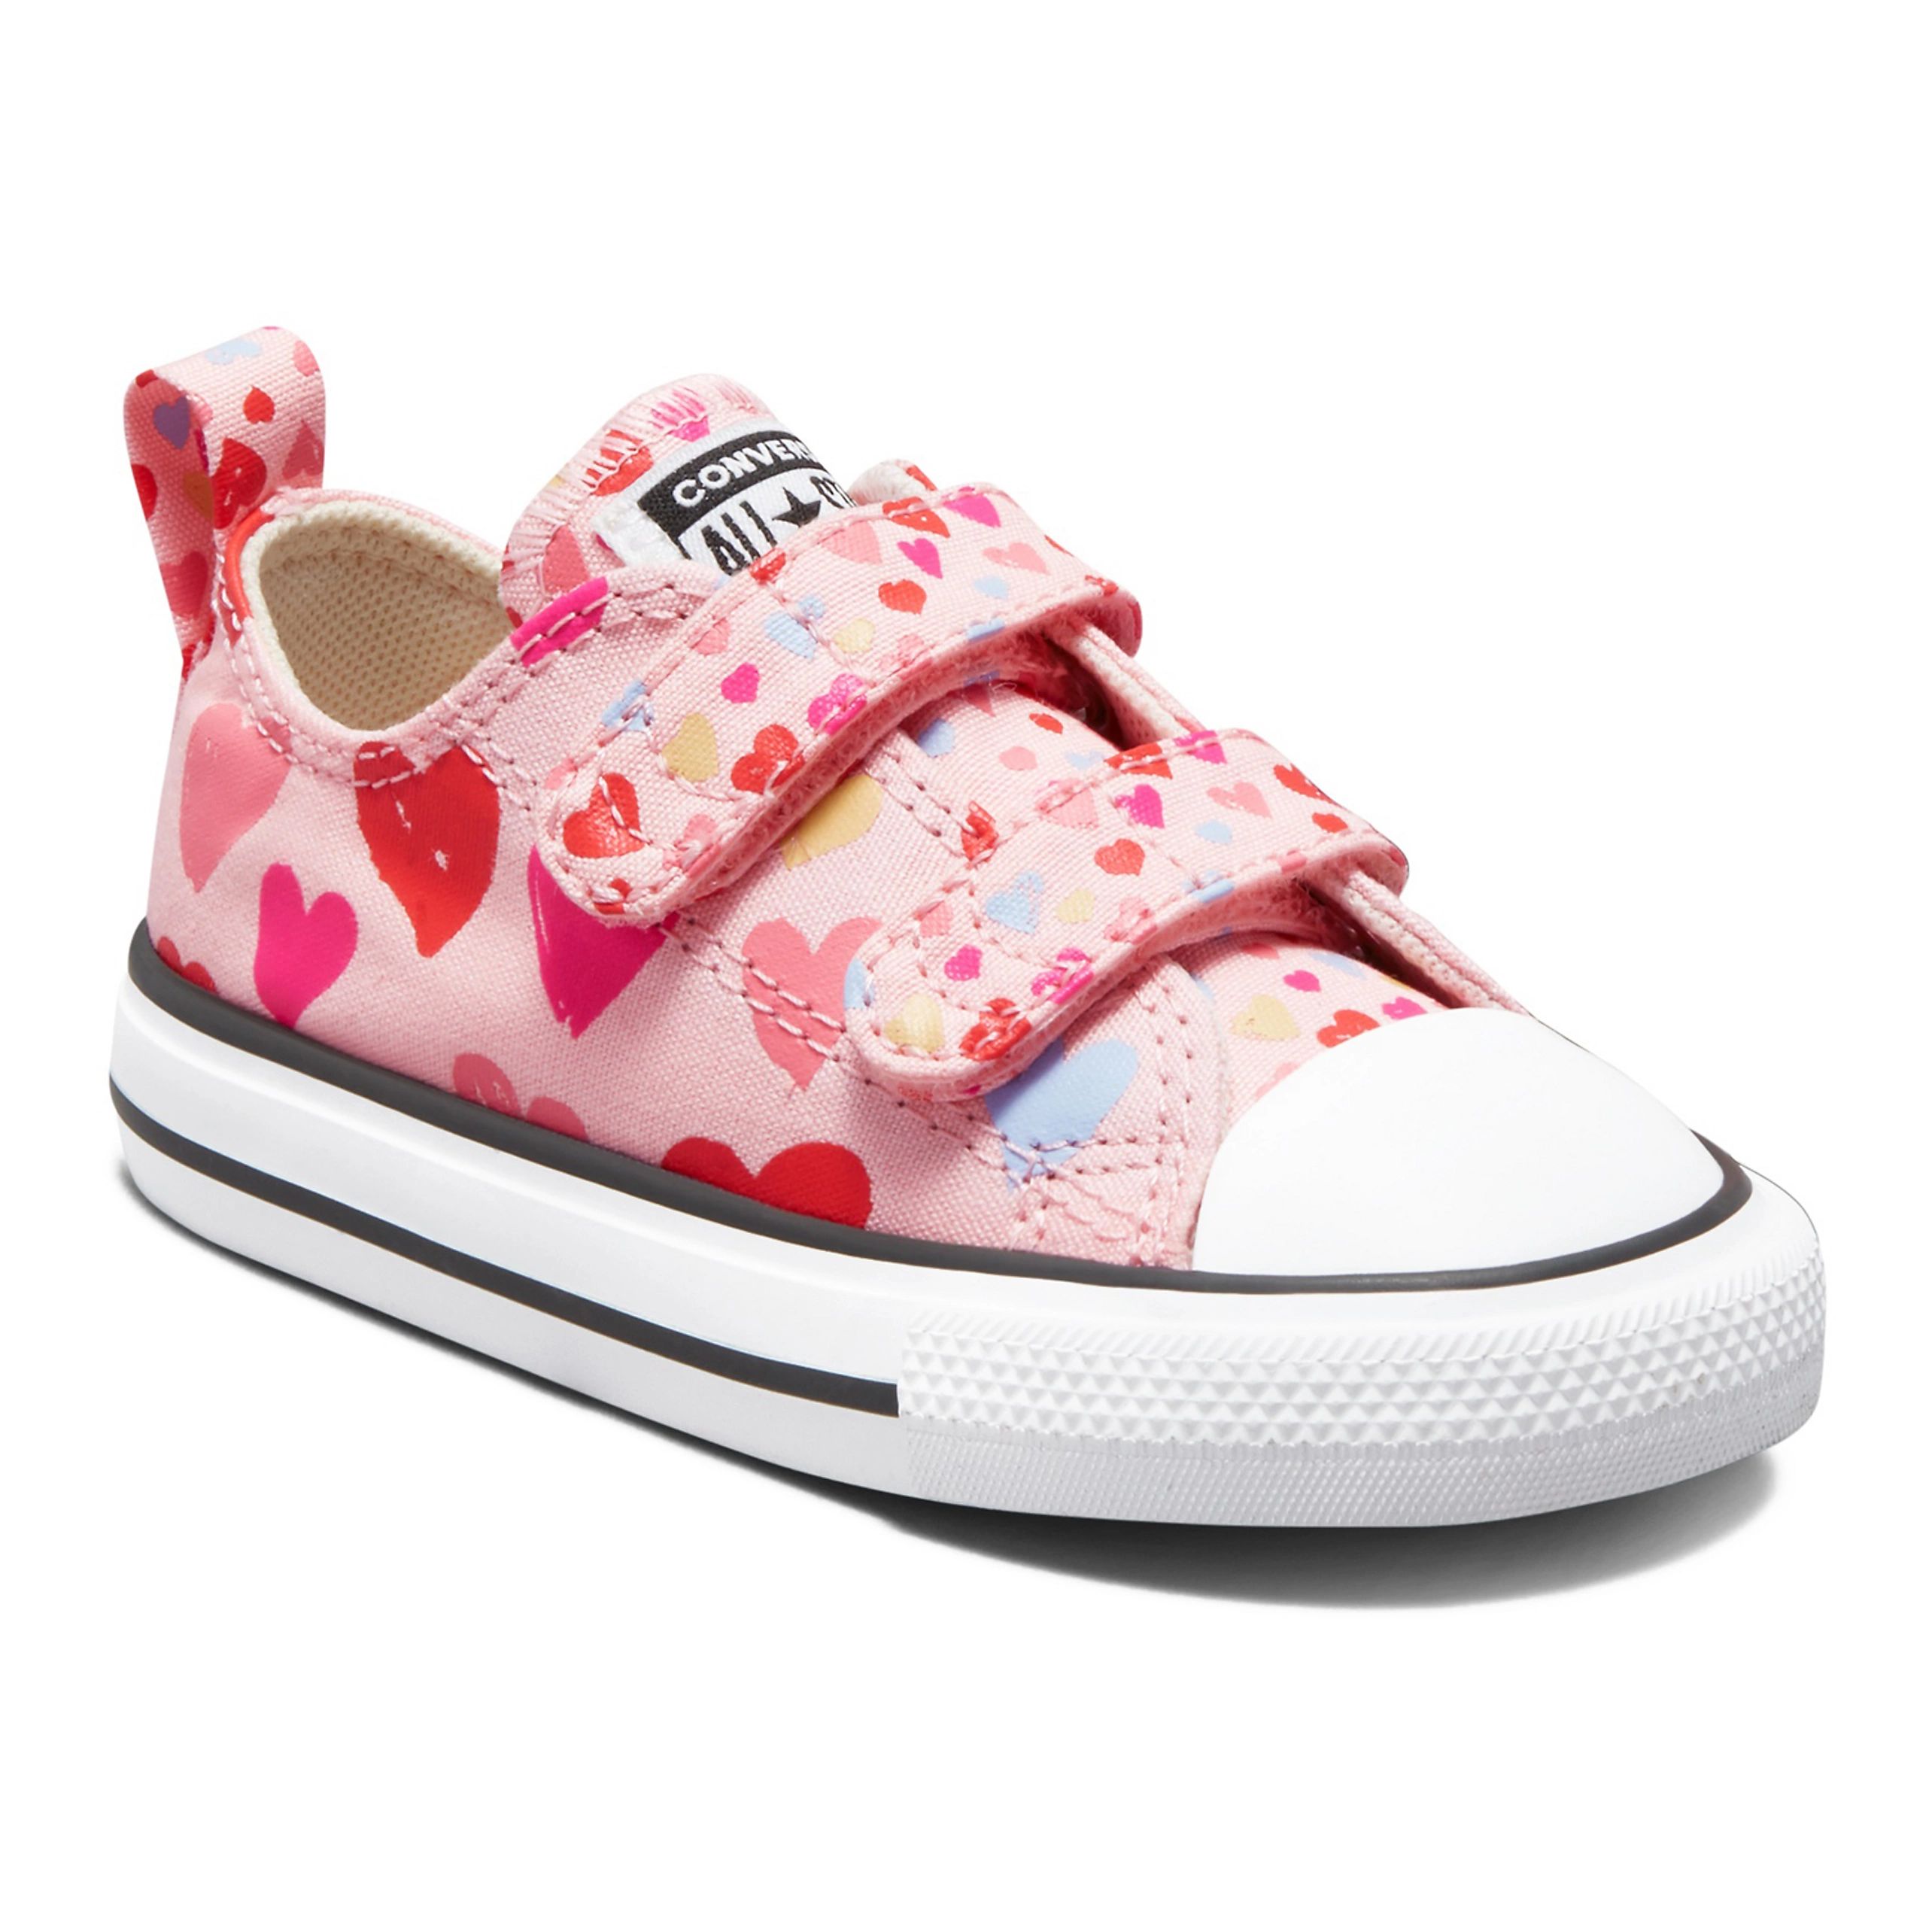 Baby / Toddler Girls' Converse Chuck Taylor All Star Heart Print 2V OX Sneakers | Kohl's